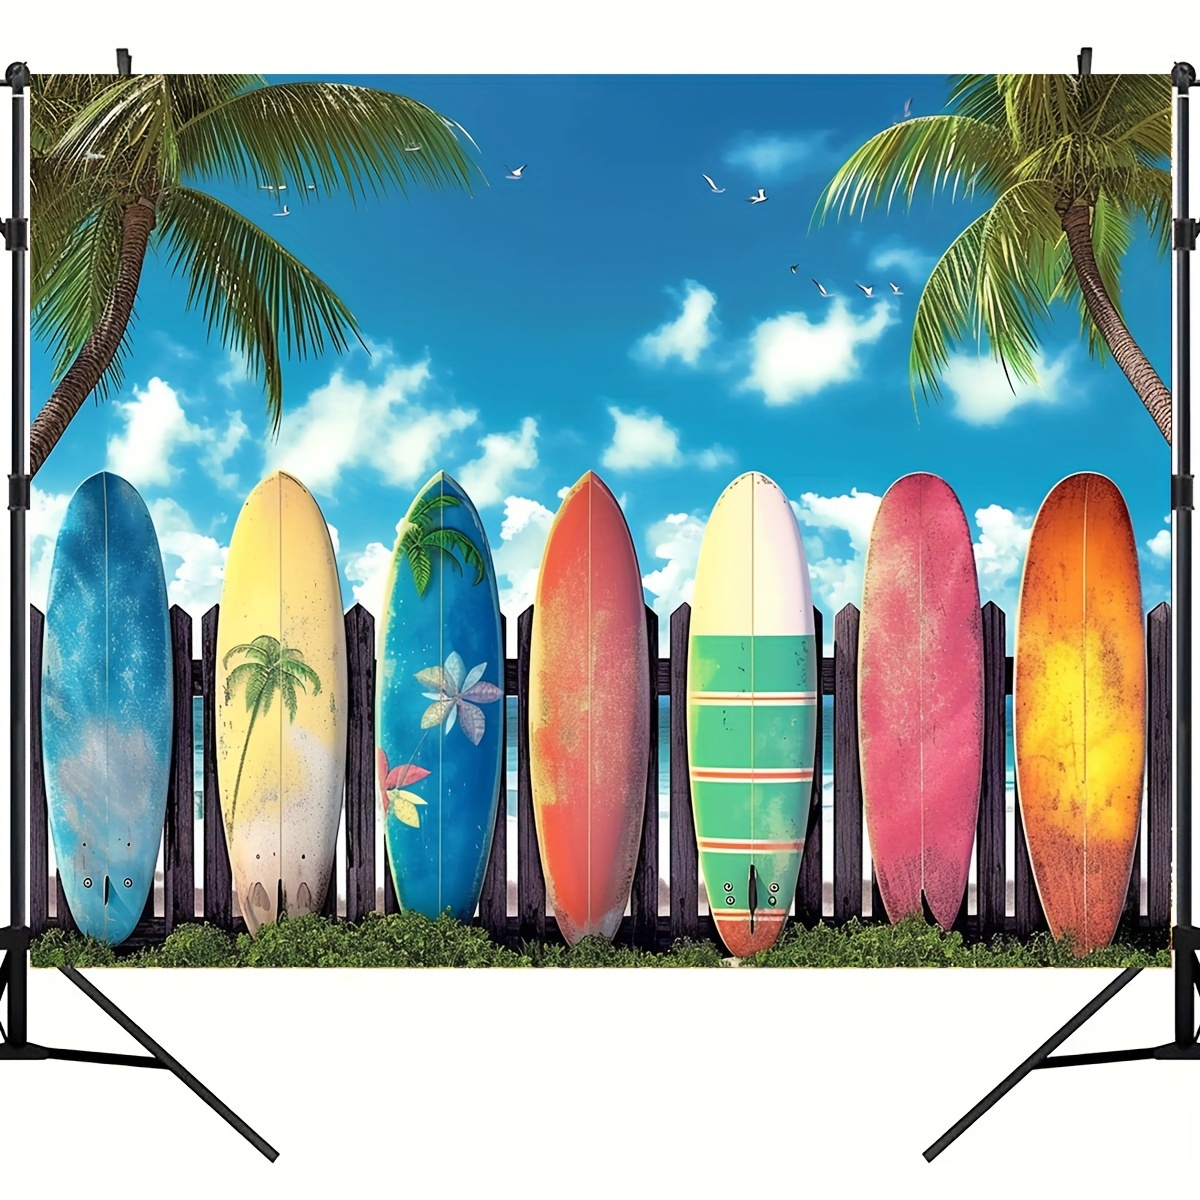 Summer Tropical Beach Backdrop Seaside Island Palm Trees Photography  Background for Picture Blue Sea Sky Sunshine Luau Themed Party Decorations  Photo Booth Studio Props 